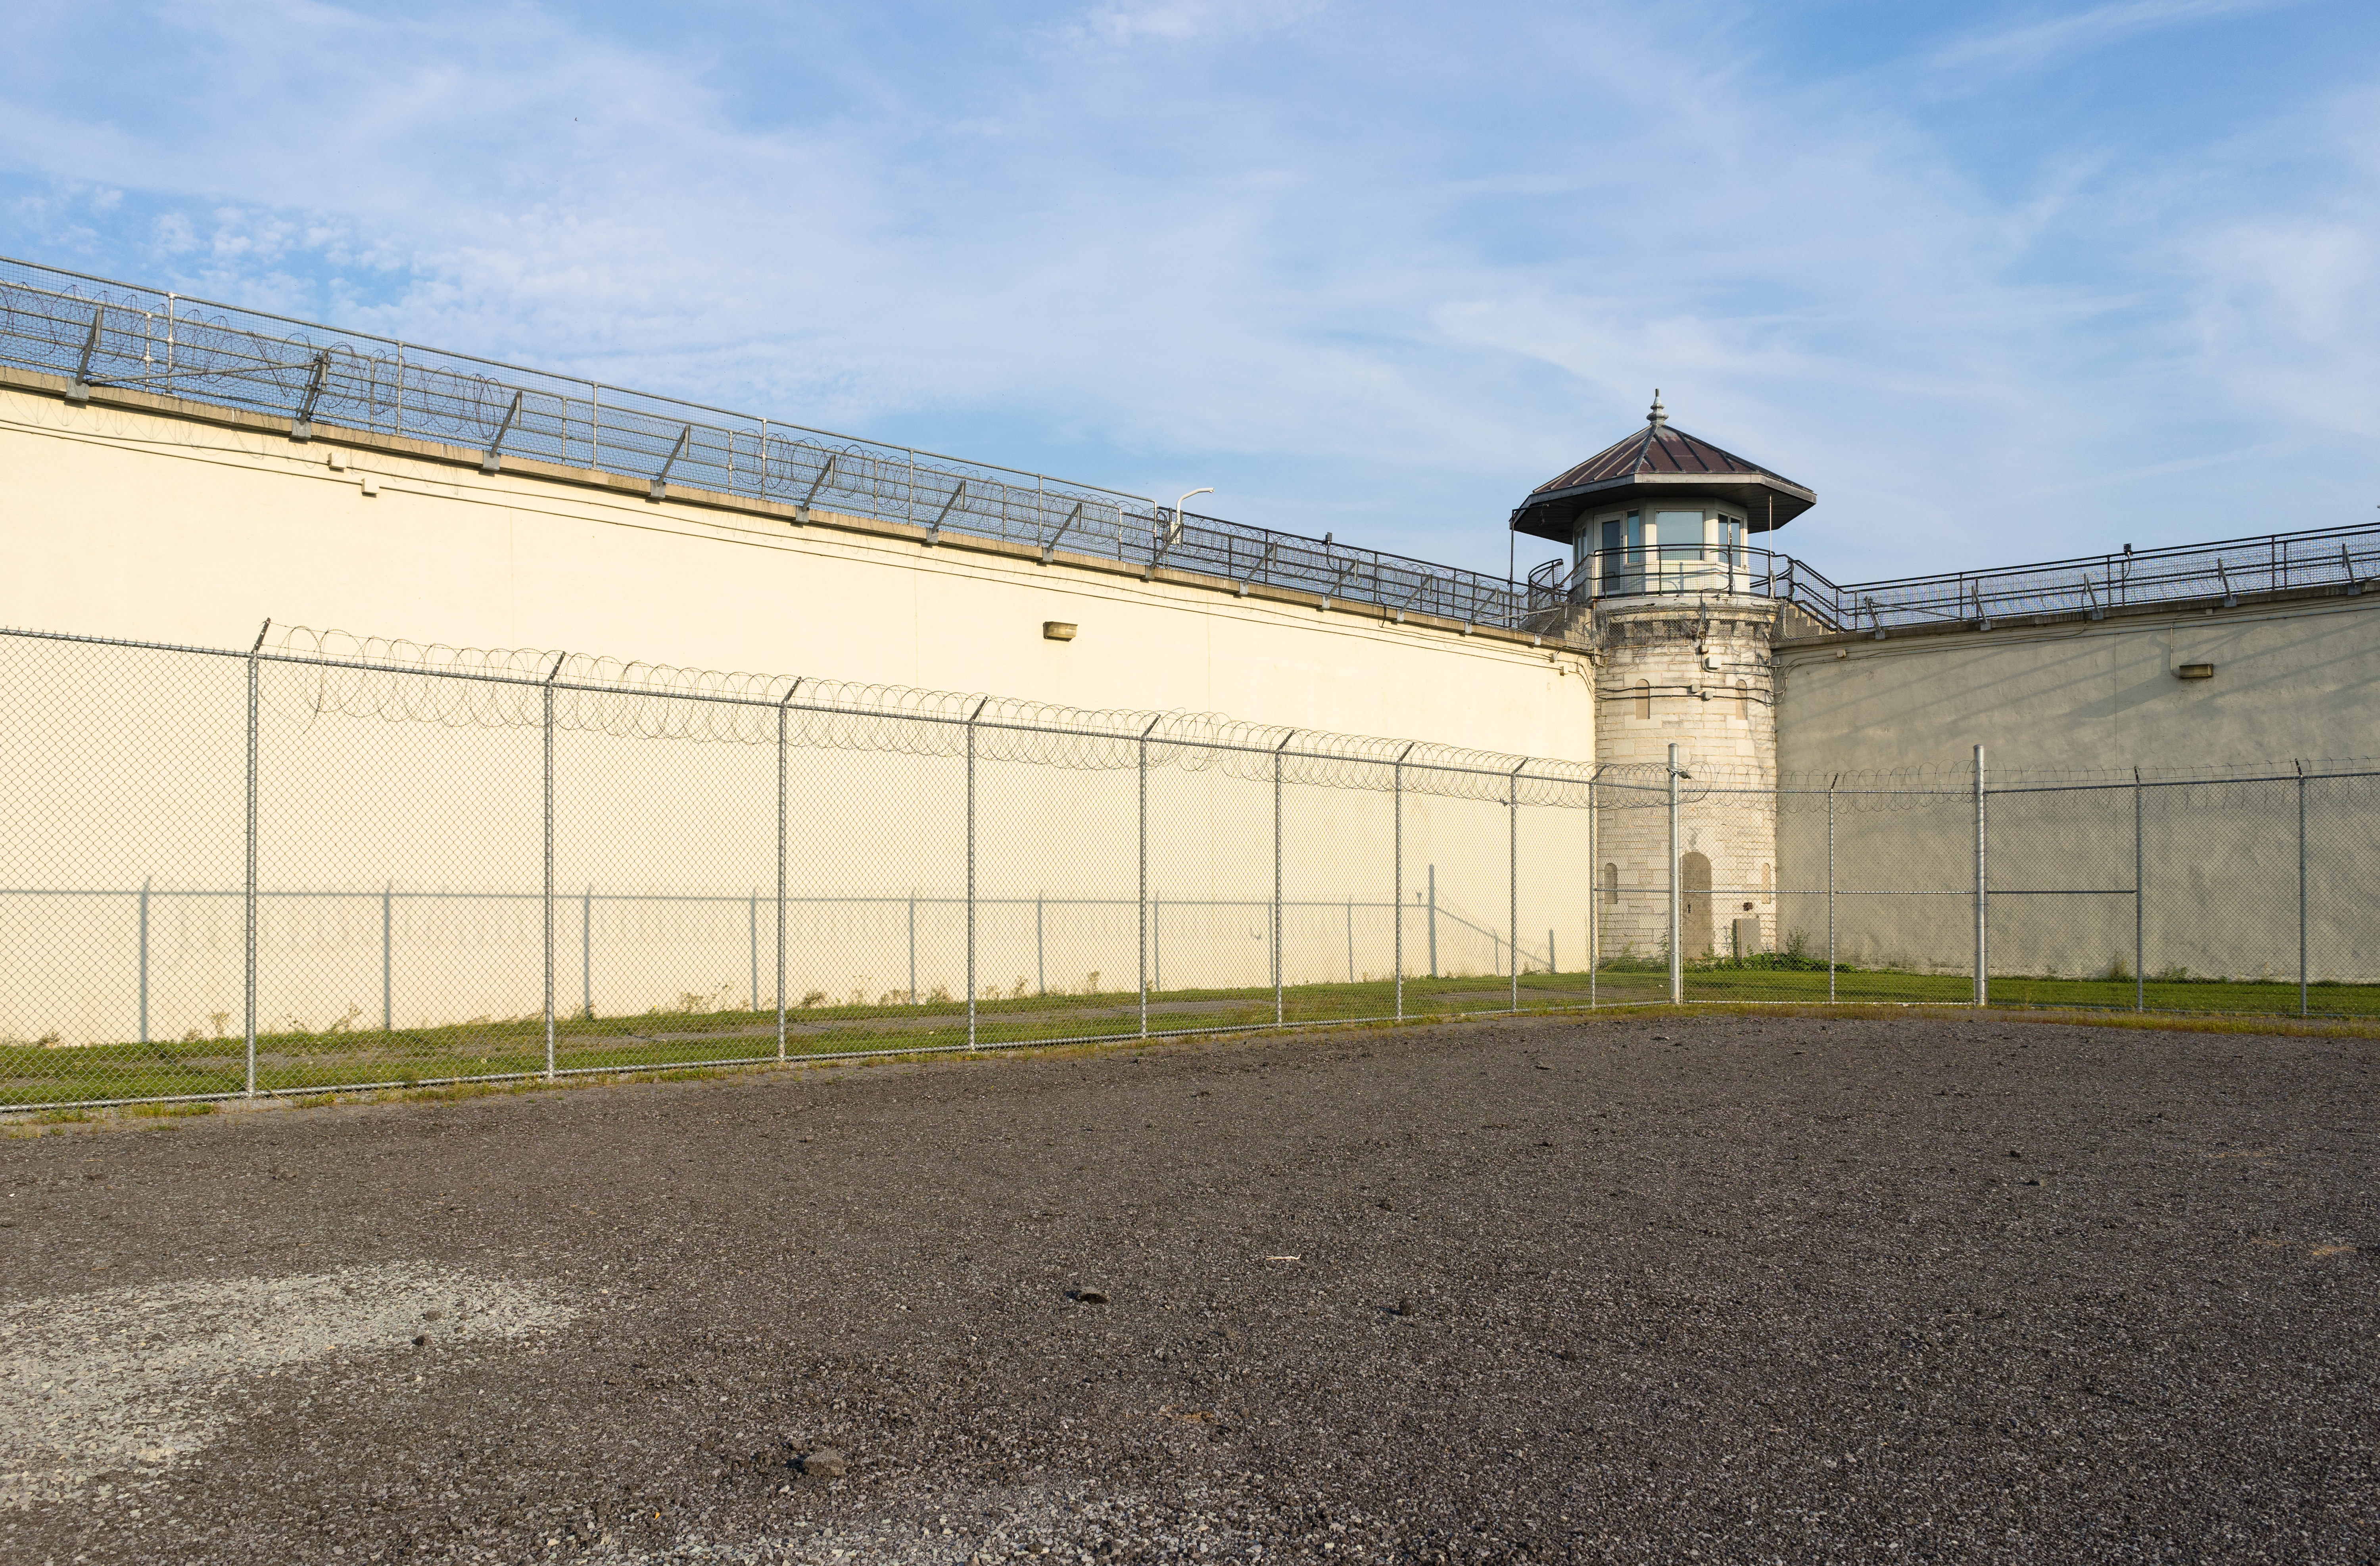 Exercise yard of a decommissioned prison. | Source: Shutterstock